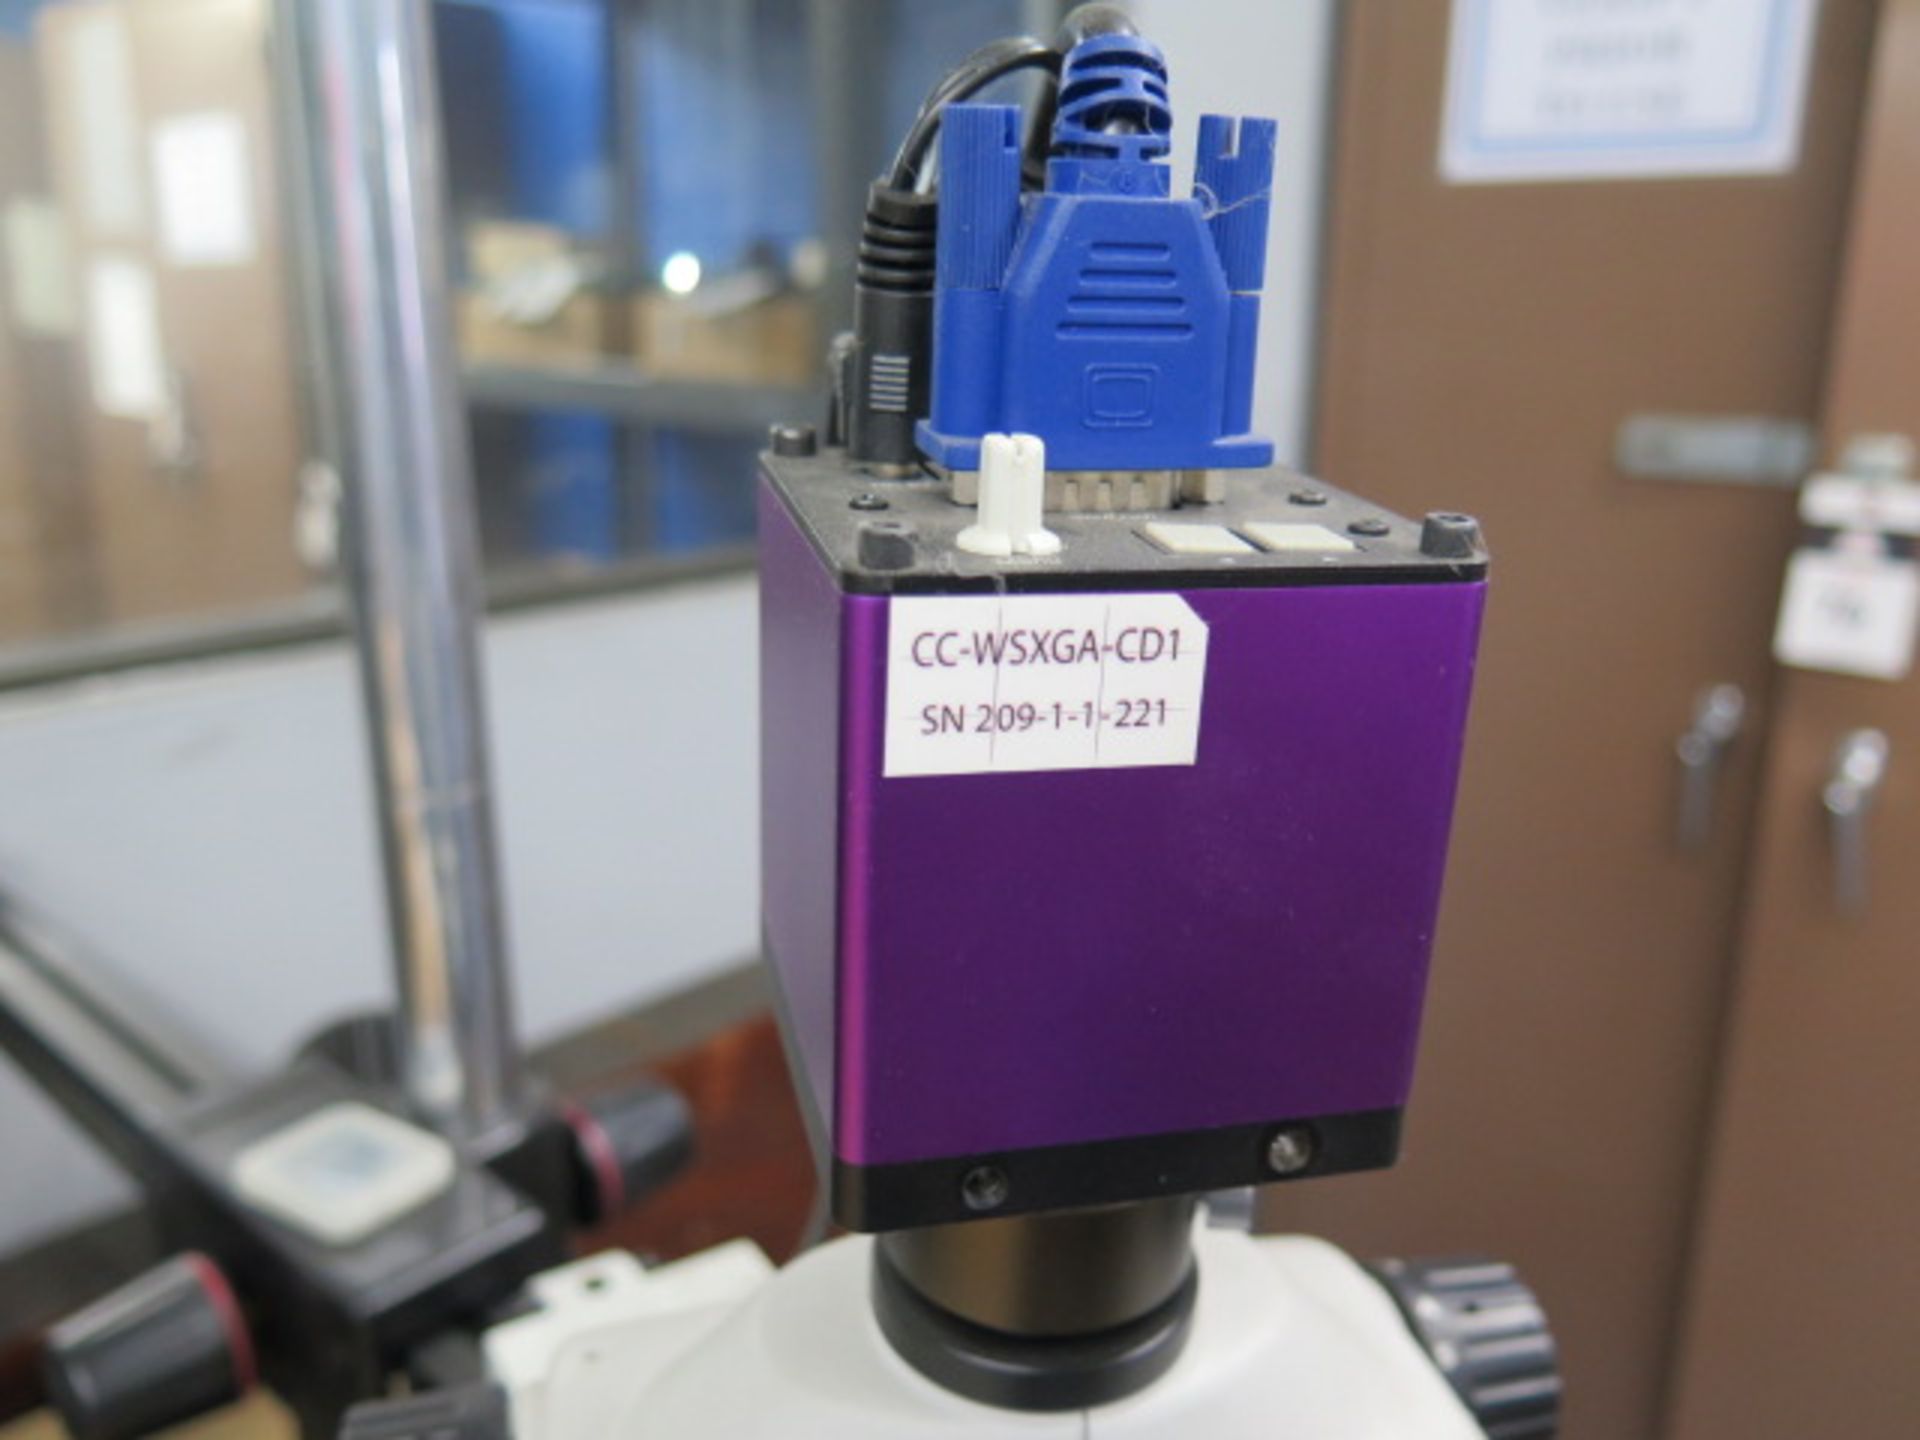 Scienscope Video Microscope w/ Light Source and Monitor (SOLD AS-IS - NO WARRANTY) - Image 3 of 8